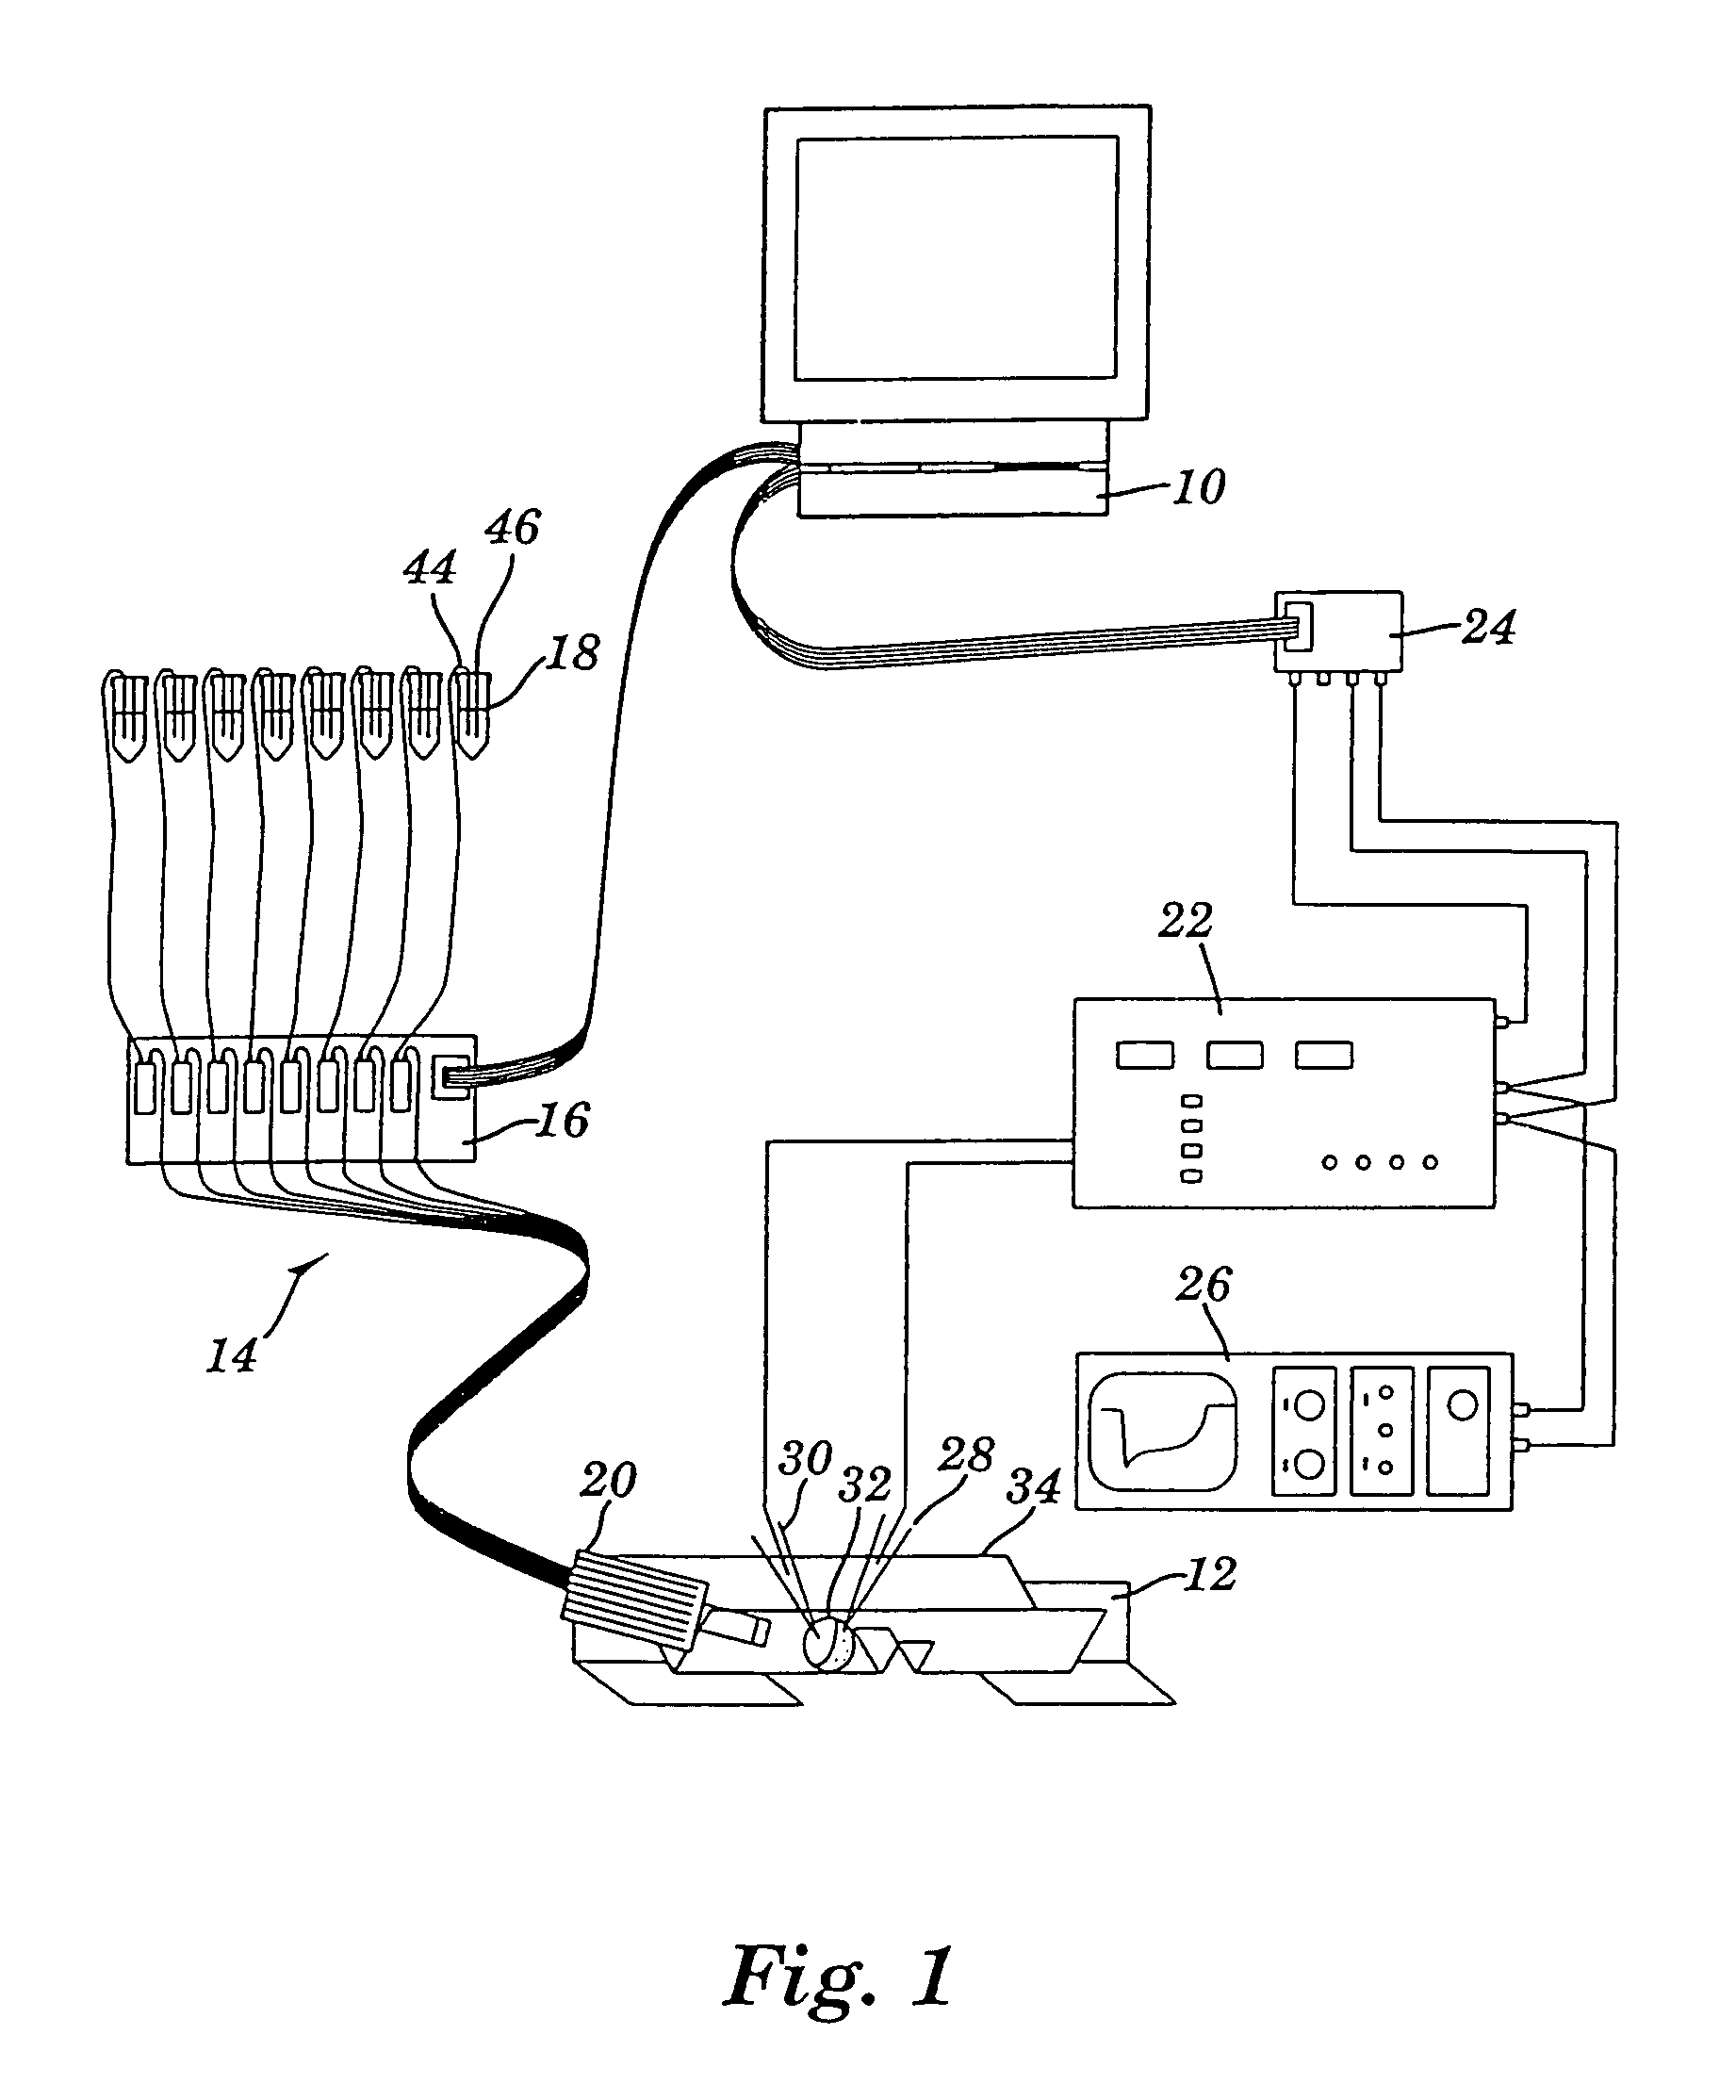 Apparatus for detecting and recording cellular responses